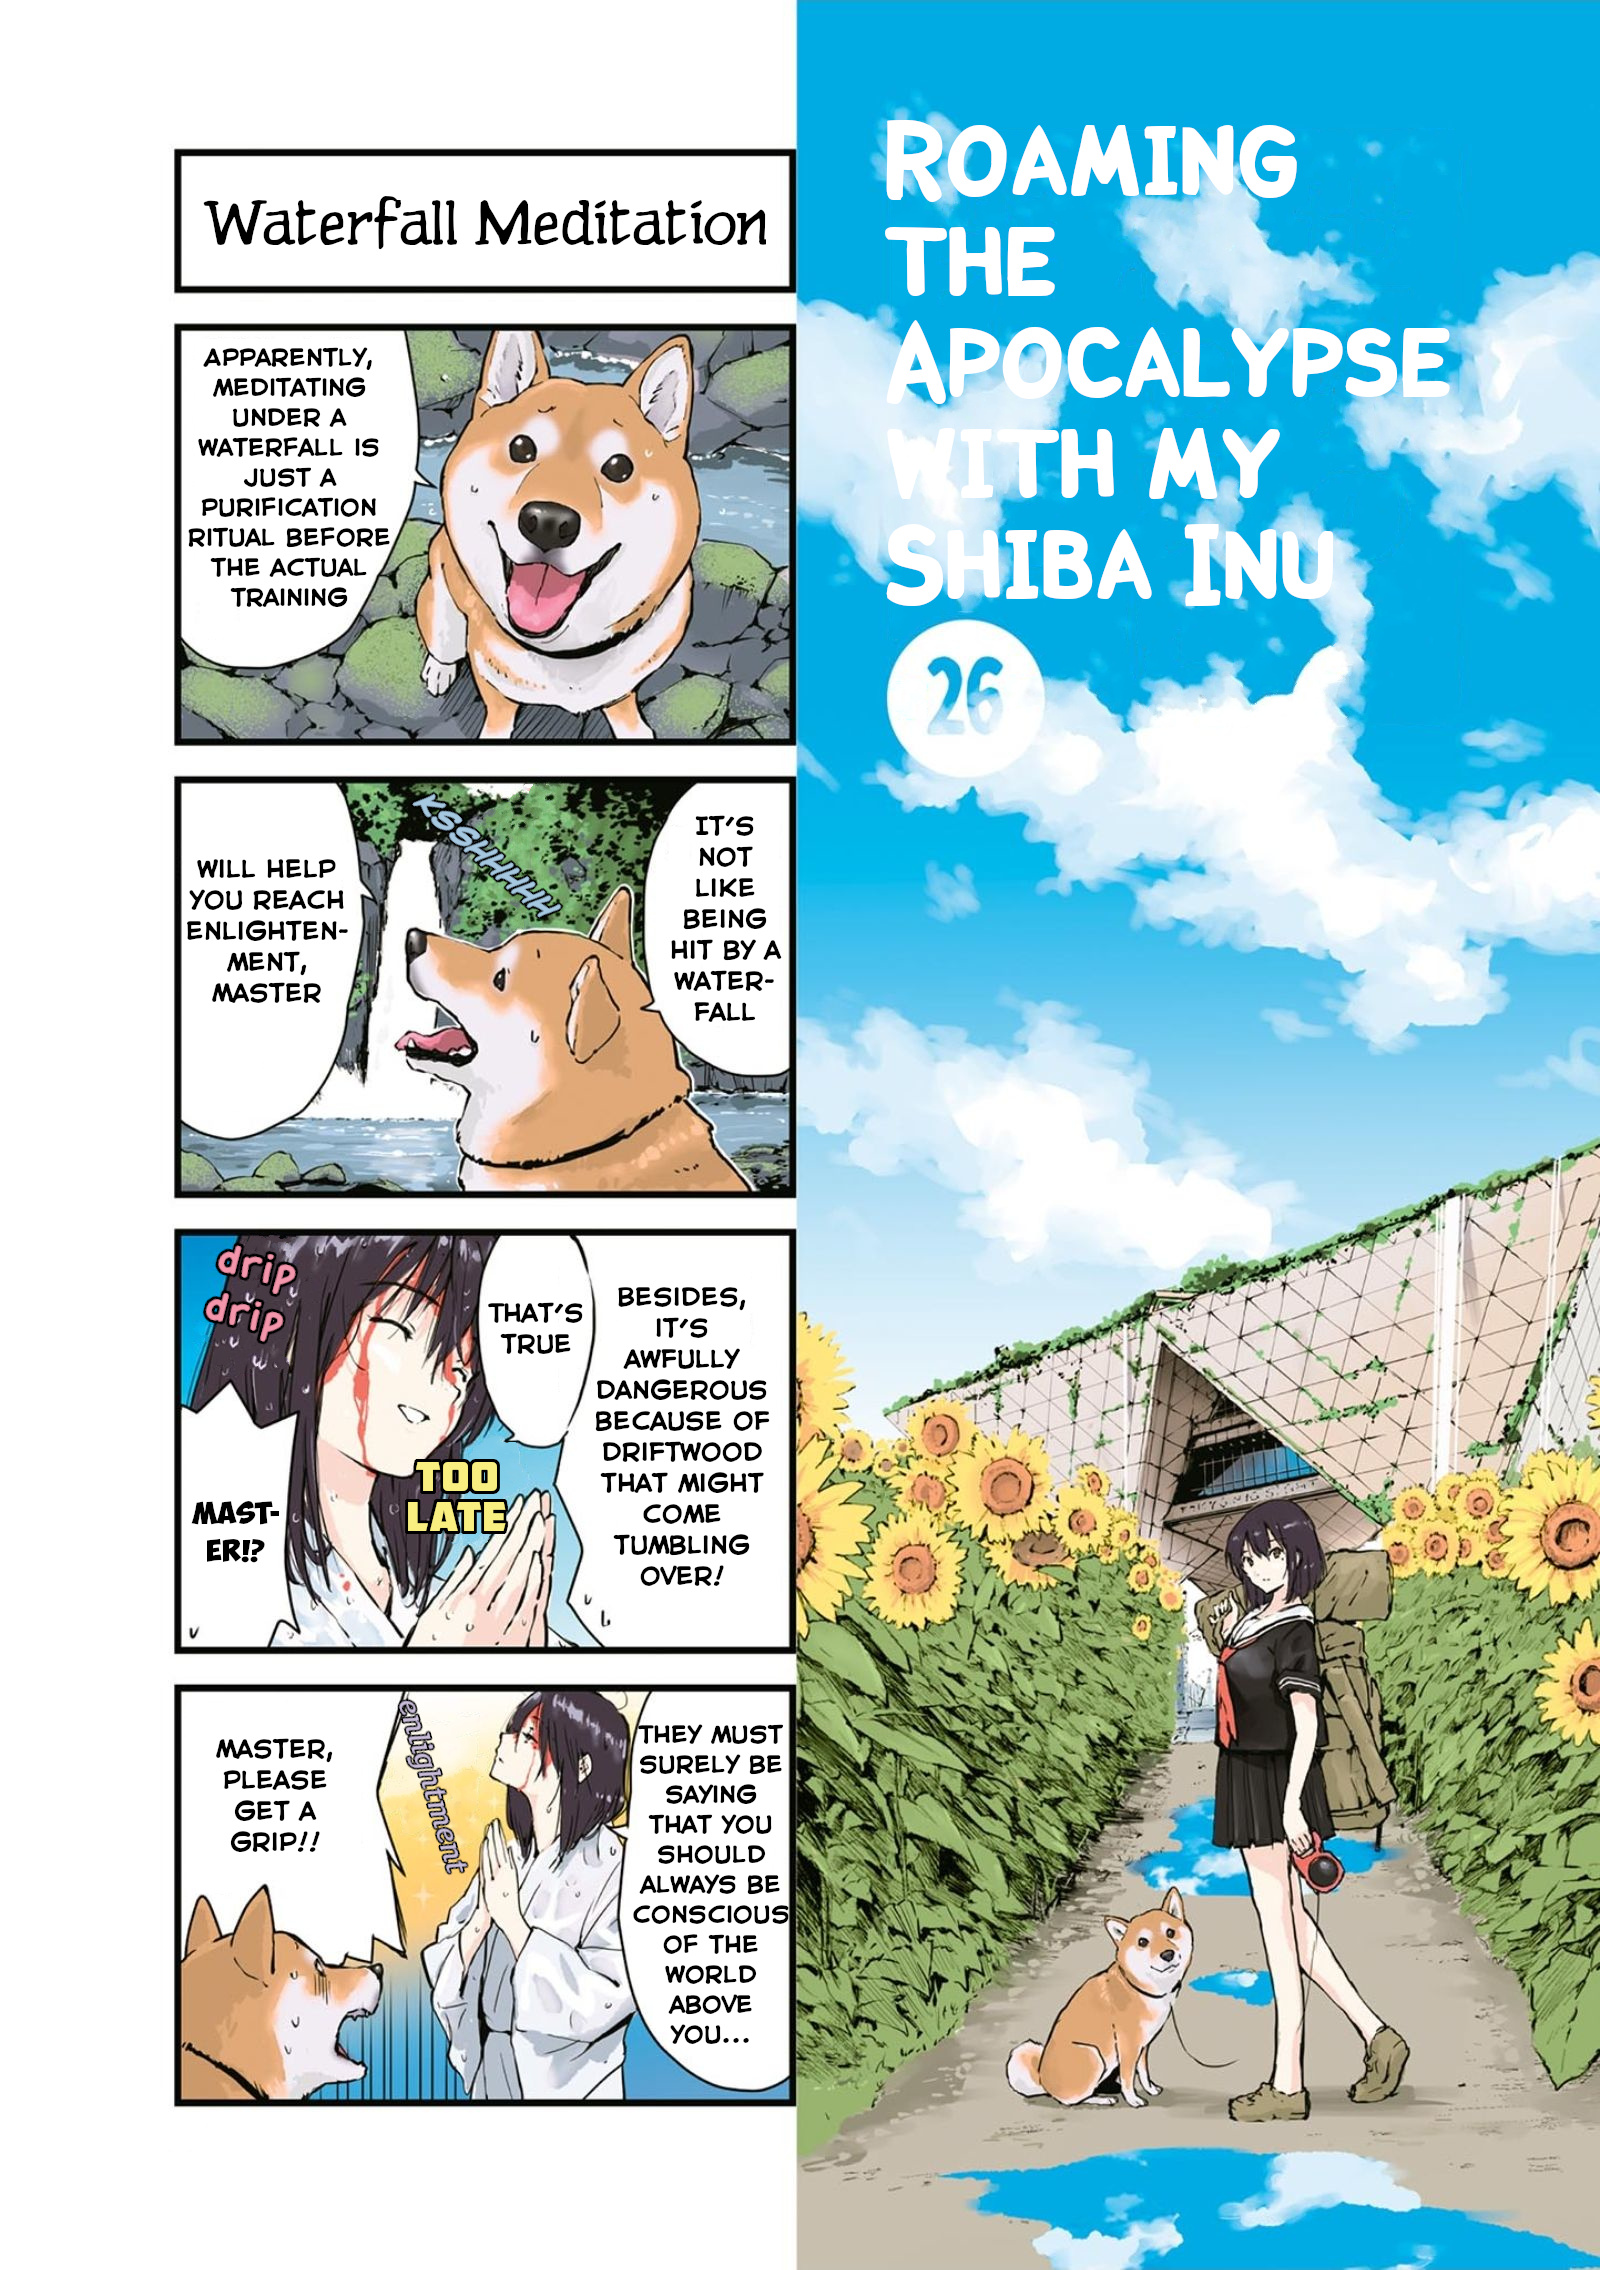 Roaming The Apocalypse With My Shiba Inu Chapter 26 #1